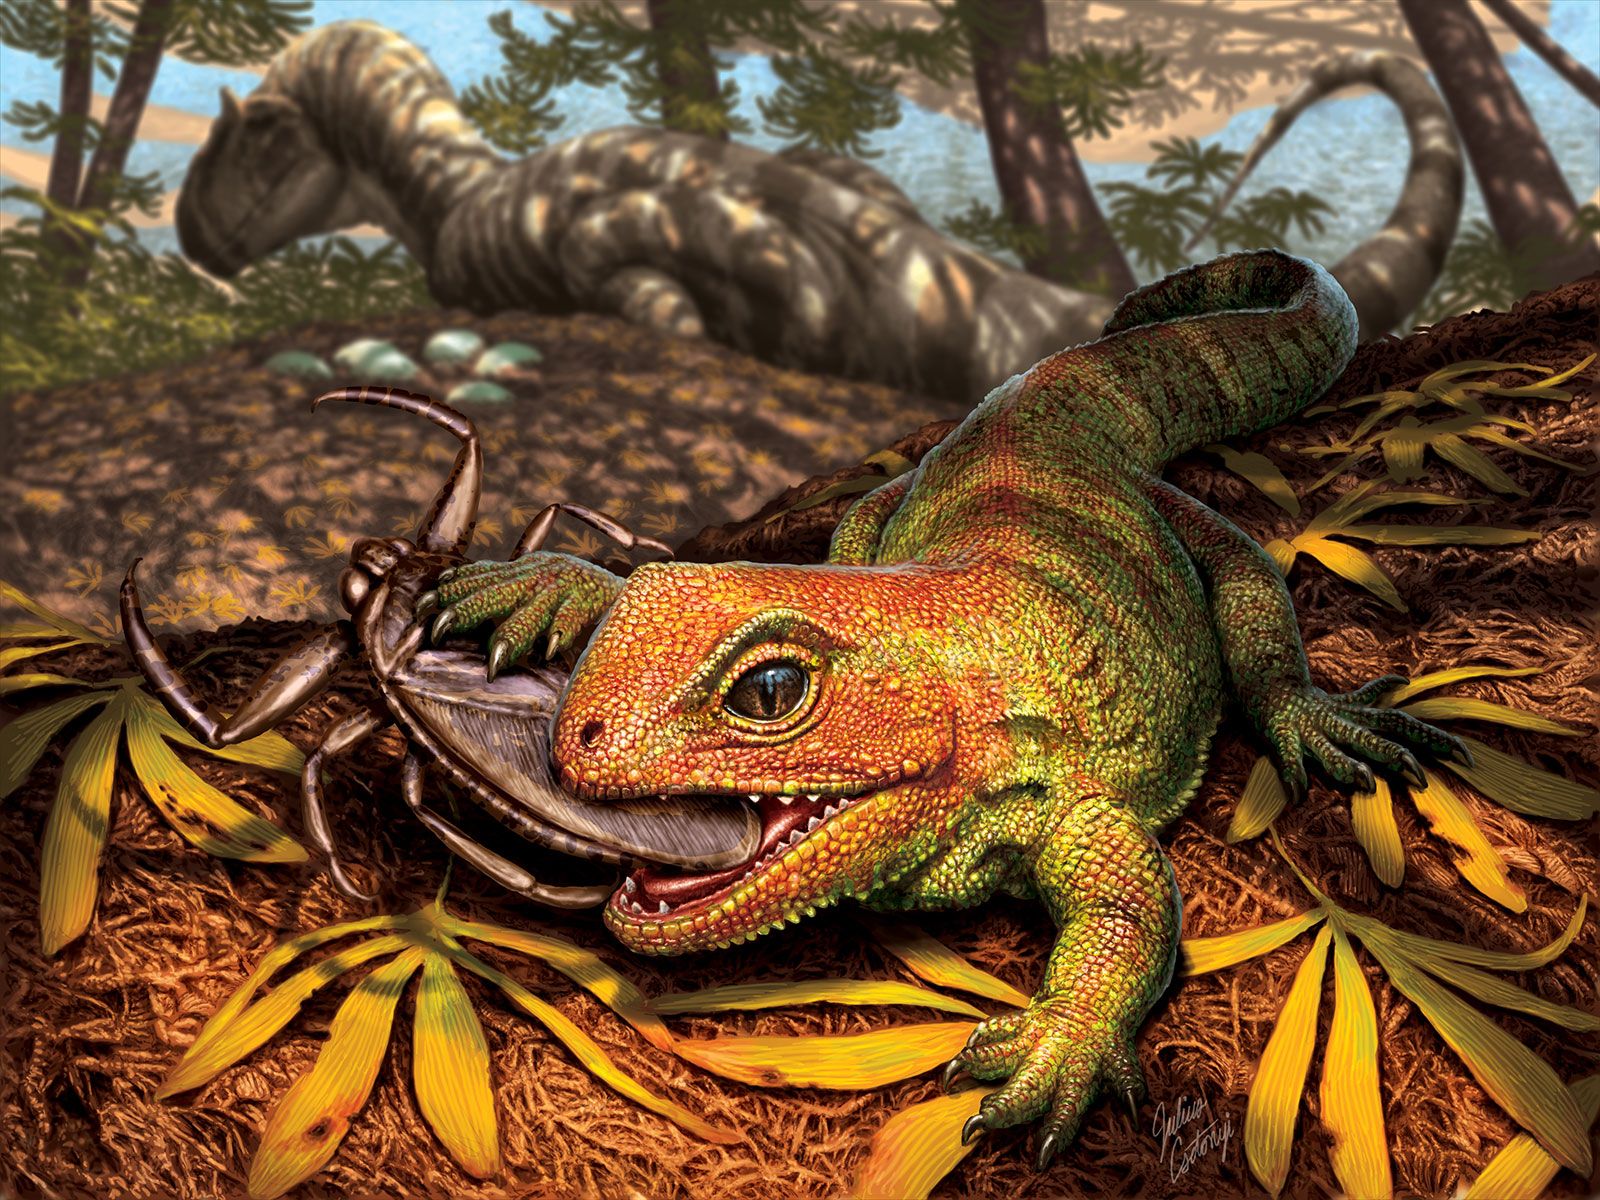 Scientists Uncover Bug-Eating Reptile That Lived Between Dinosaurs | Science